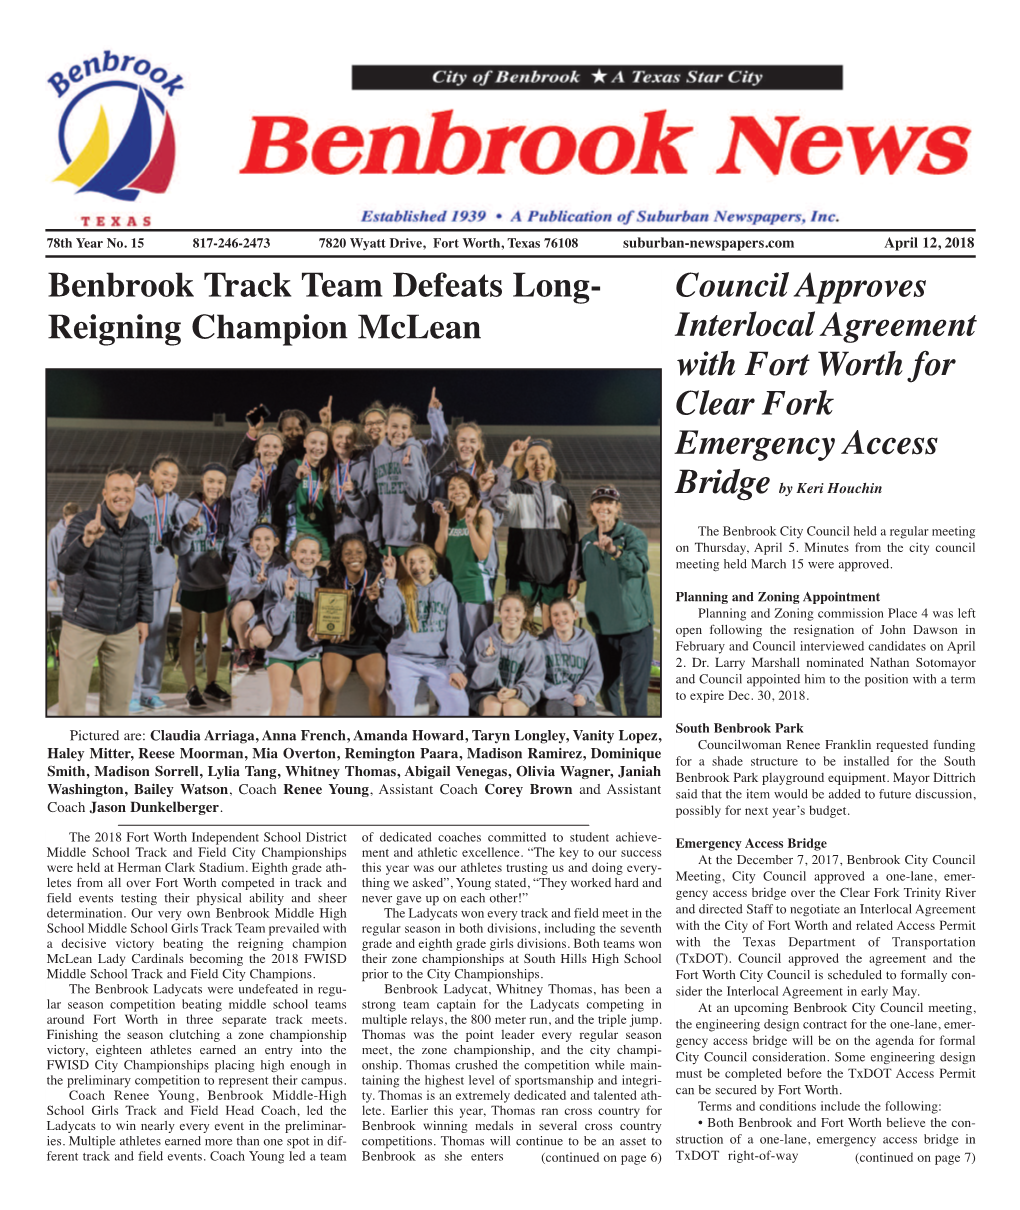 Benbrook Track Team Defeats Long- Reigning Champion Mclean Council Approves Interlocal Agreement with Fort Worth for Clear Fork